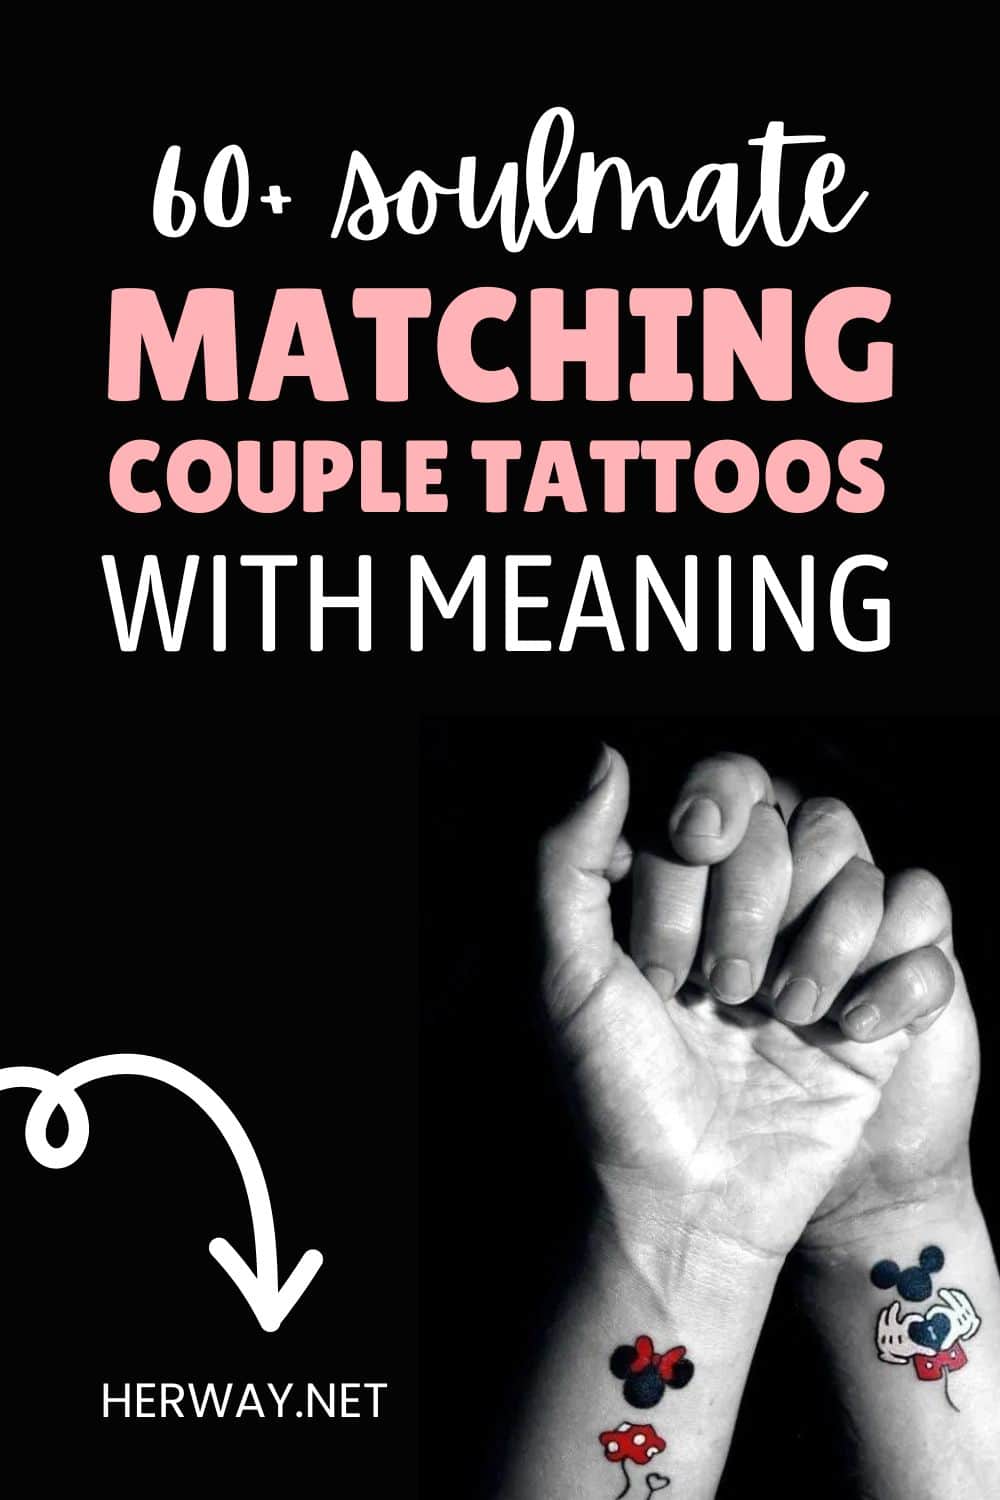 60+ Soulmate Matching Couple Tattoos With Meaning Pinterest